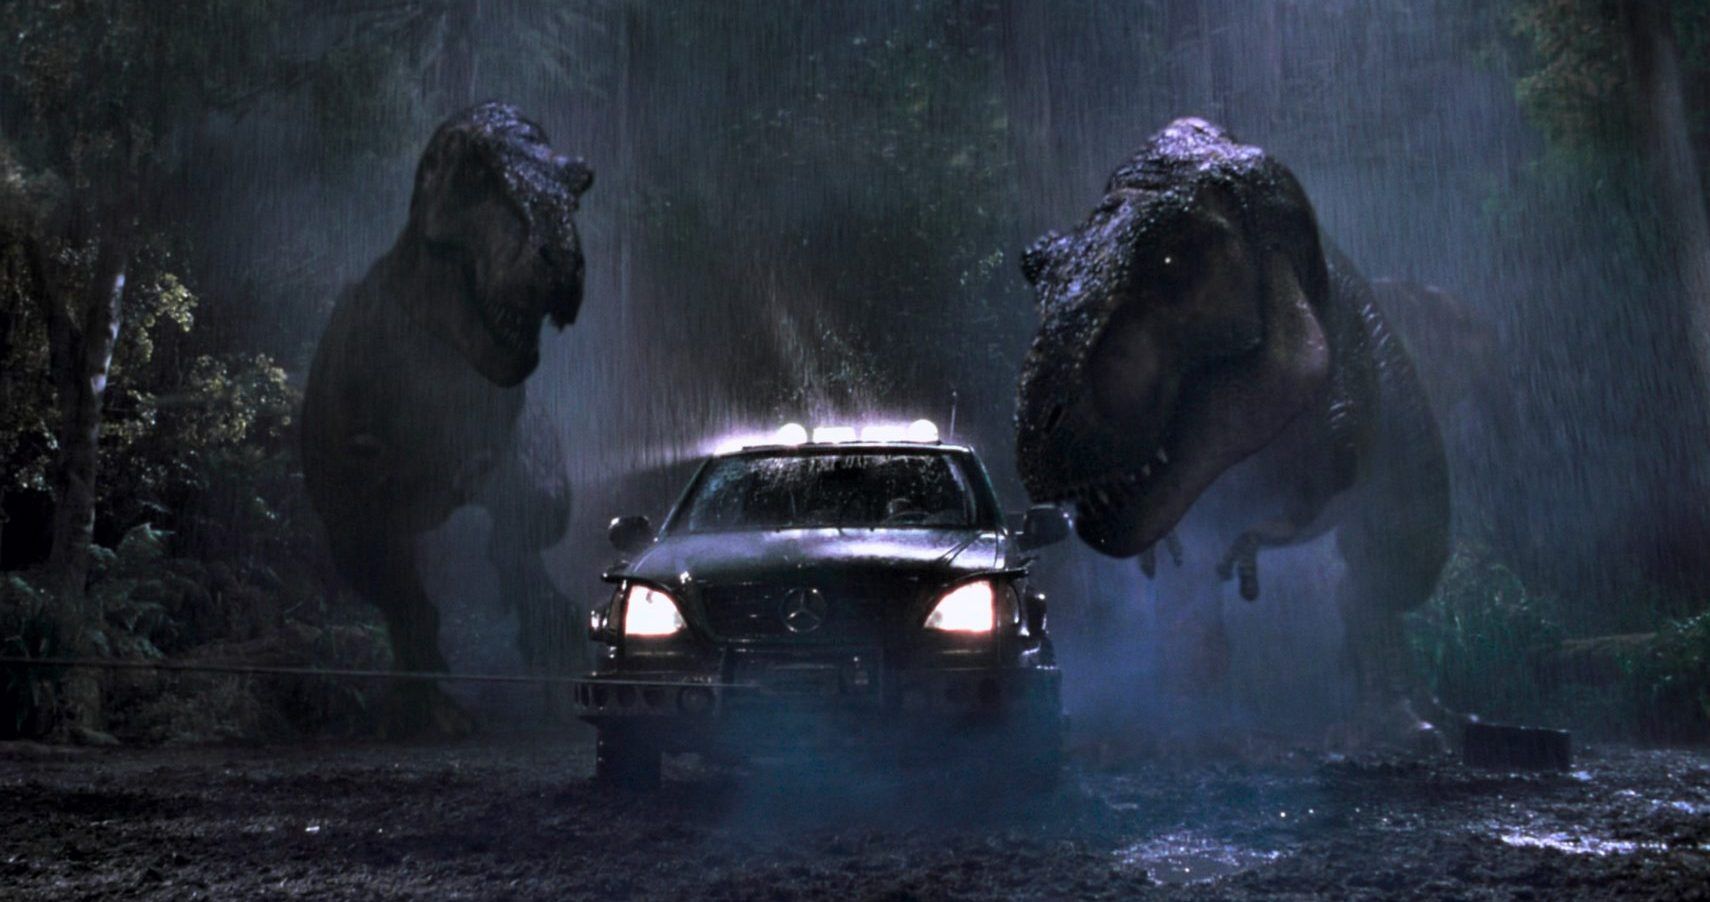 Jurassic Park: 10 Sequel Moments That Lived Up To The Original